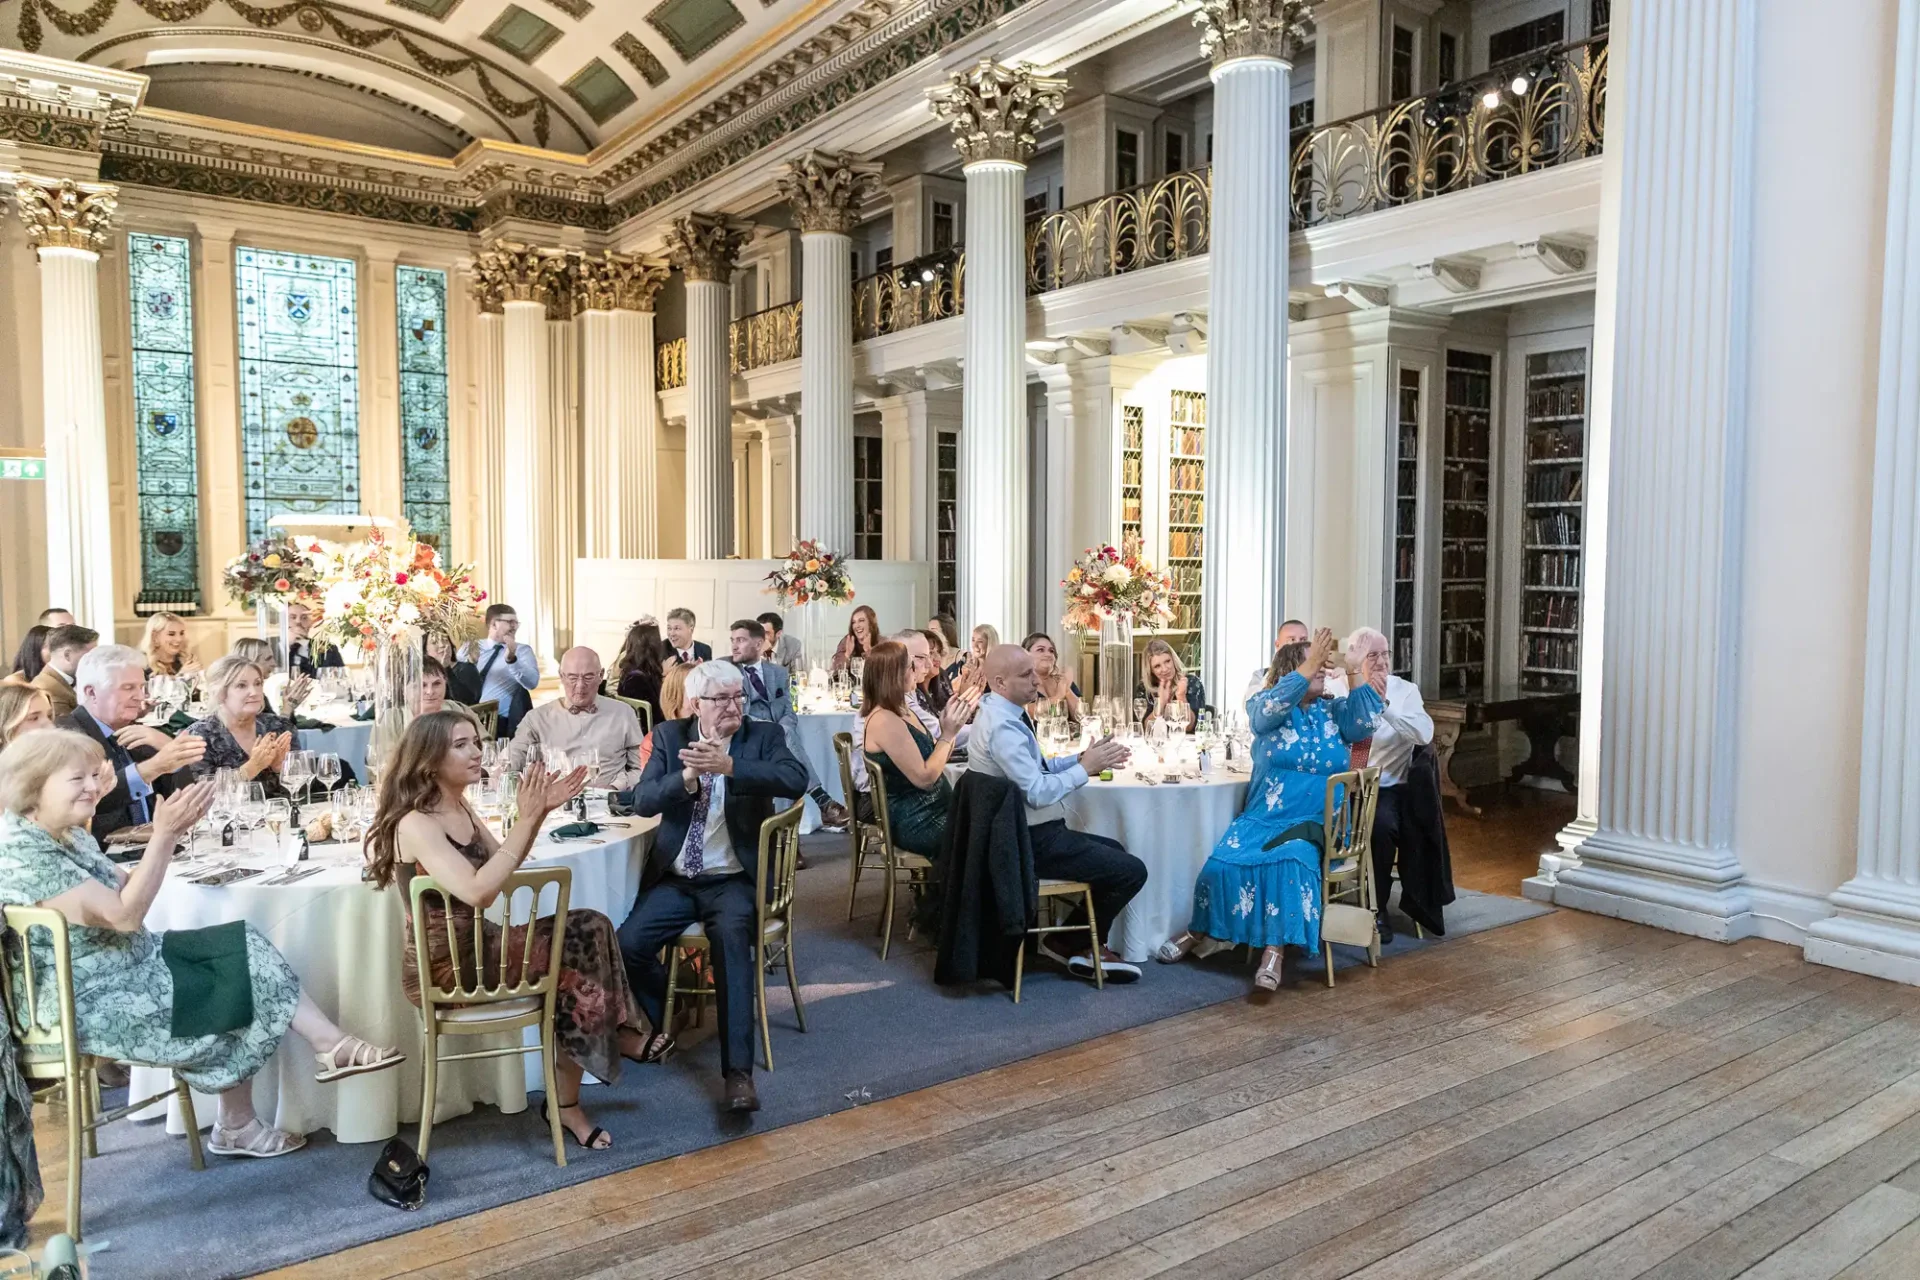 Guests seated at banquet tables applauding in an elegant hall with ornate balconies and a stained glass window.